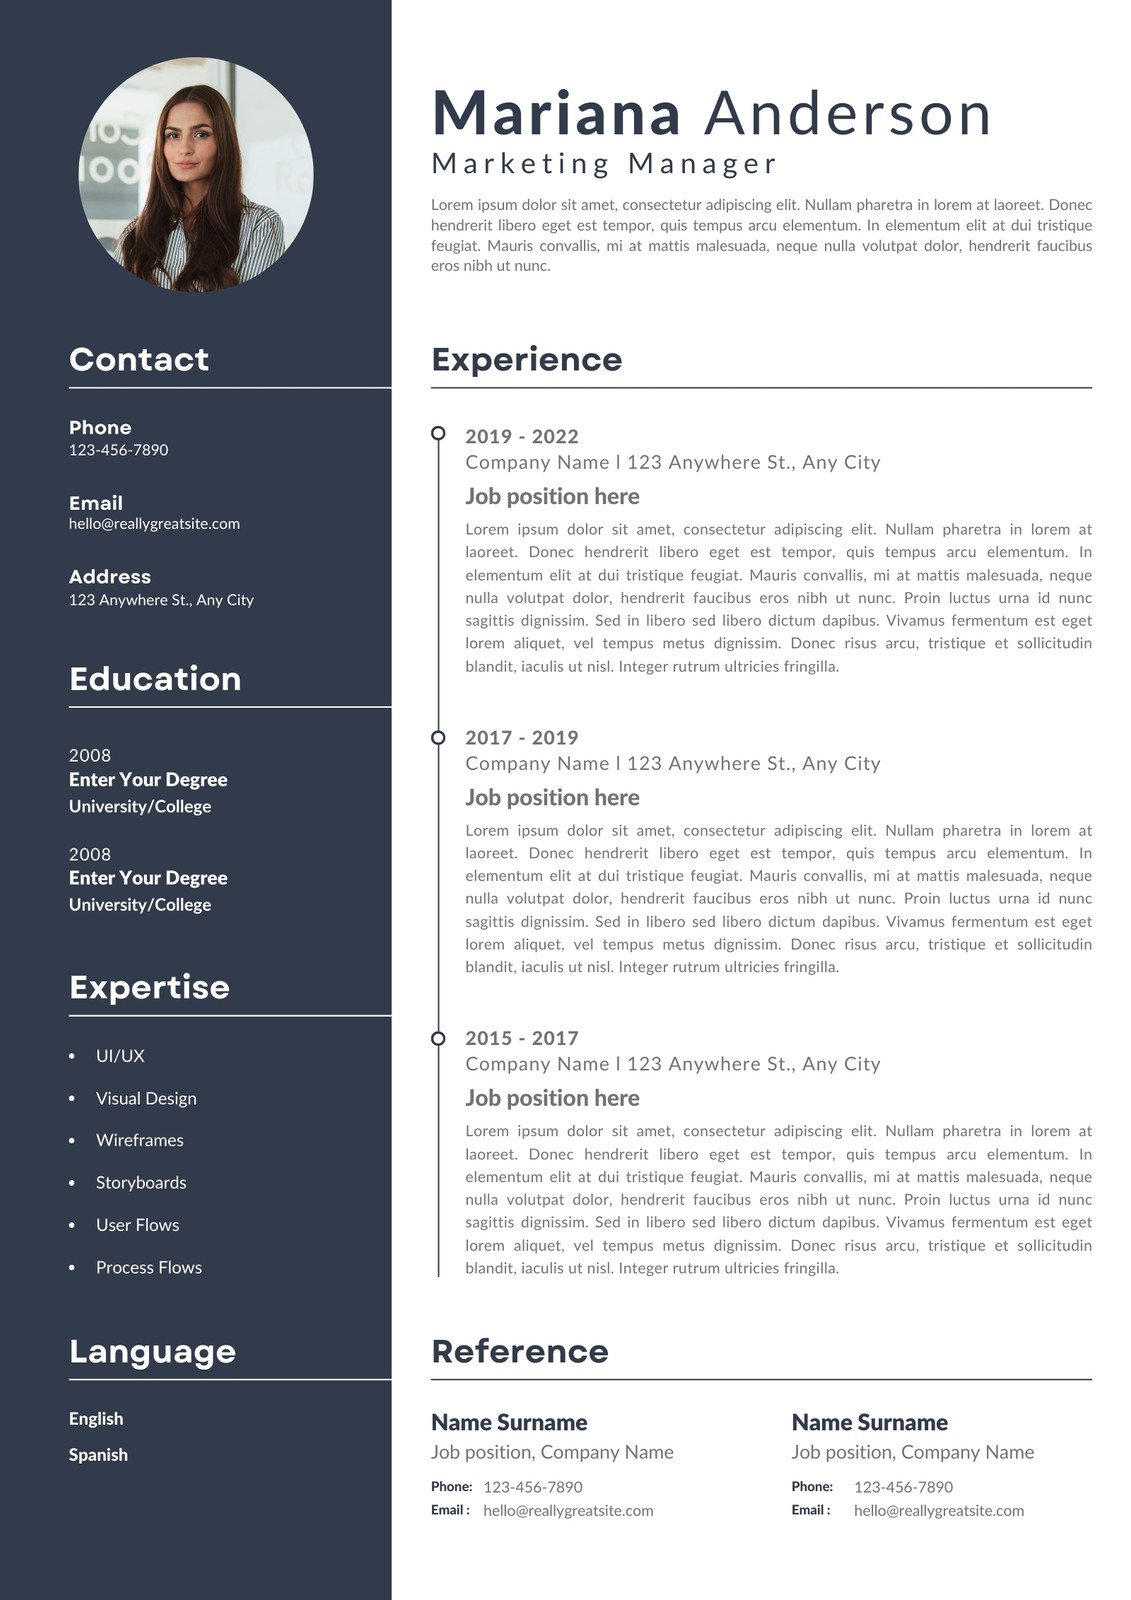 Collection of Over 999 Resumes – Incredible Assortment with Stunning 4K Images